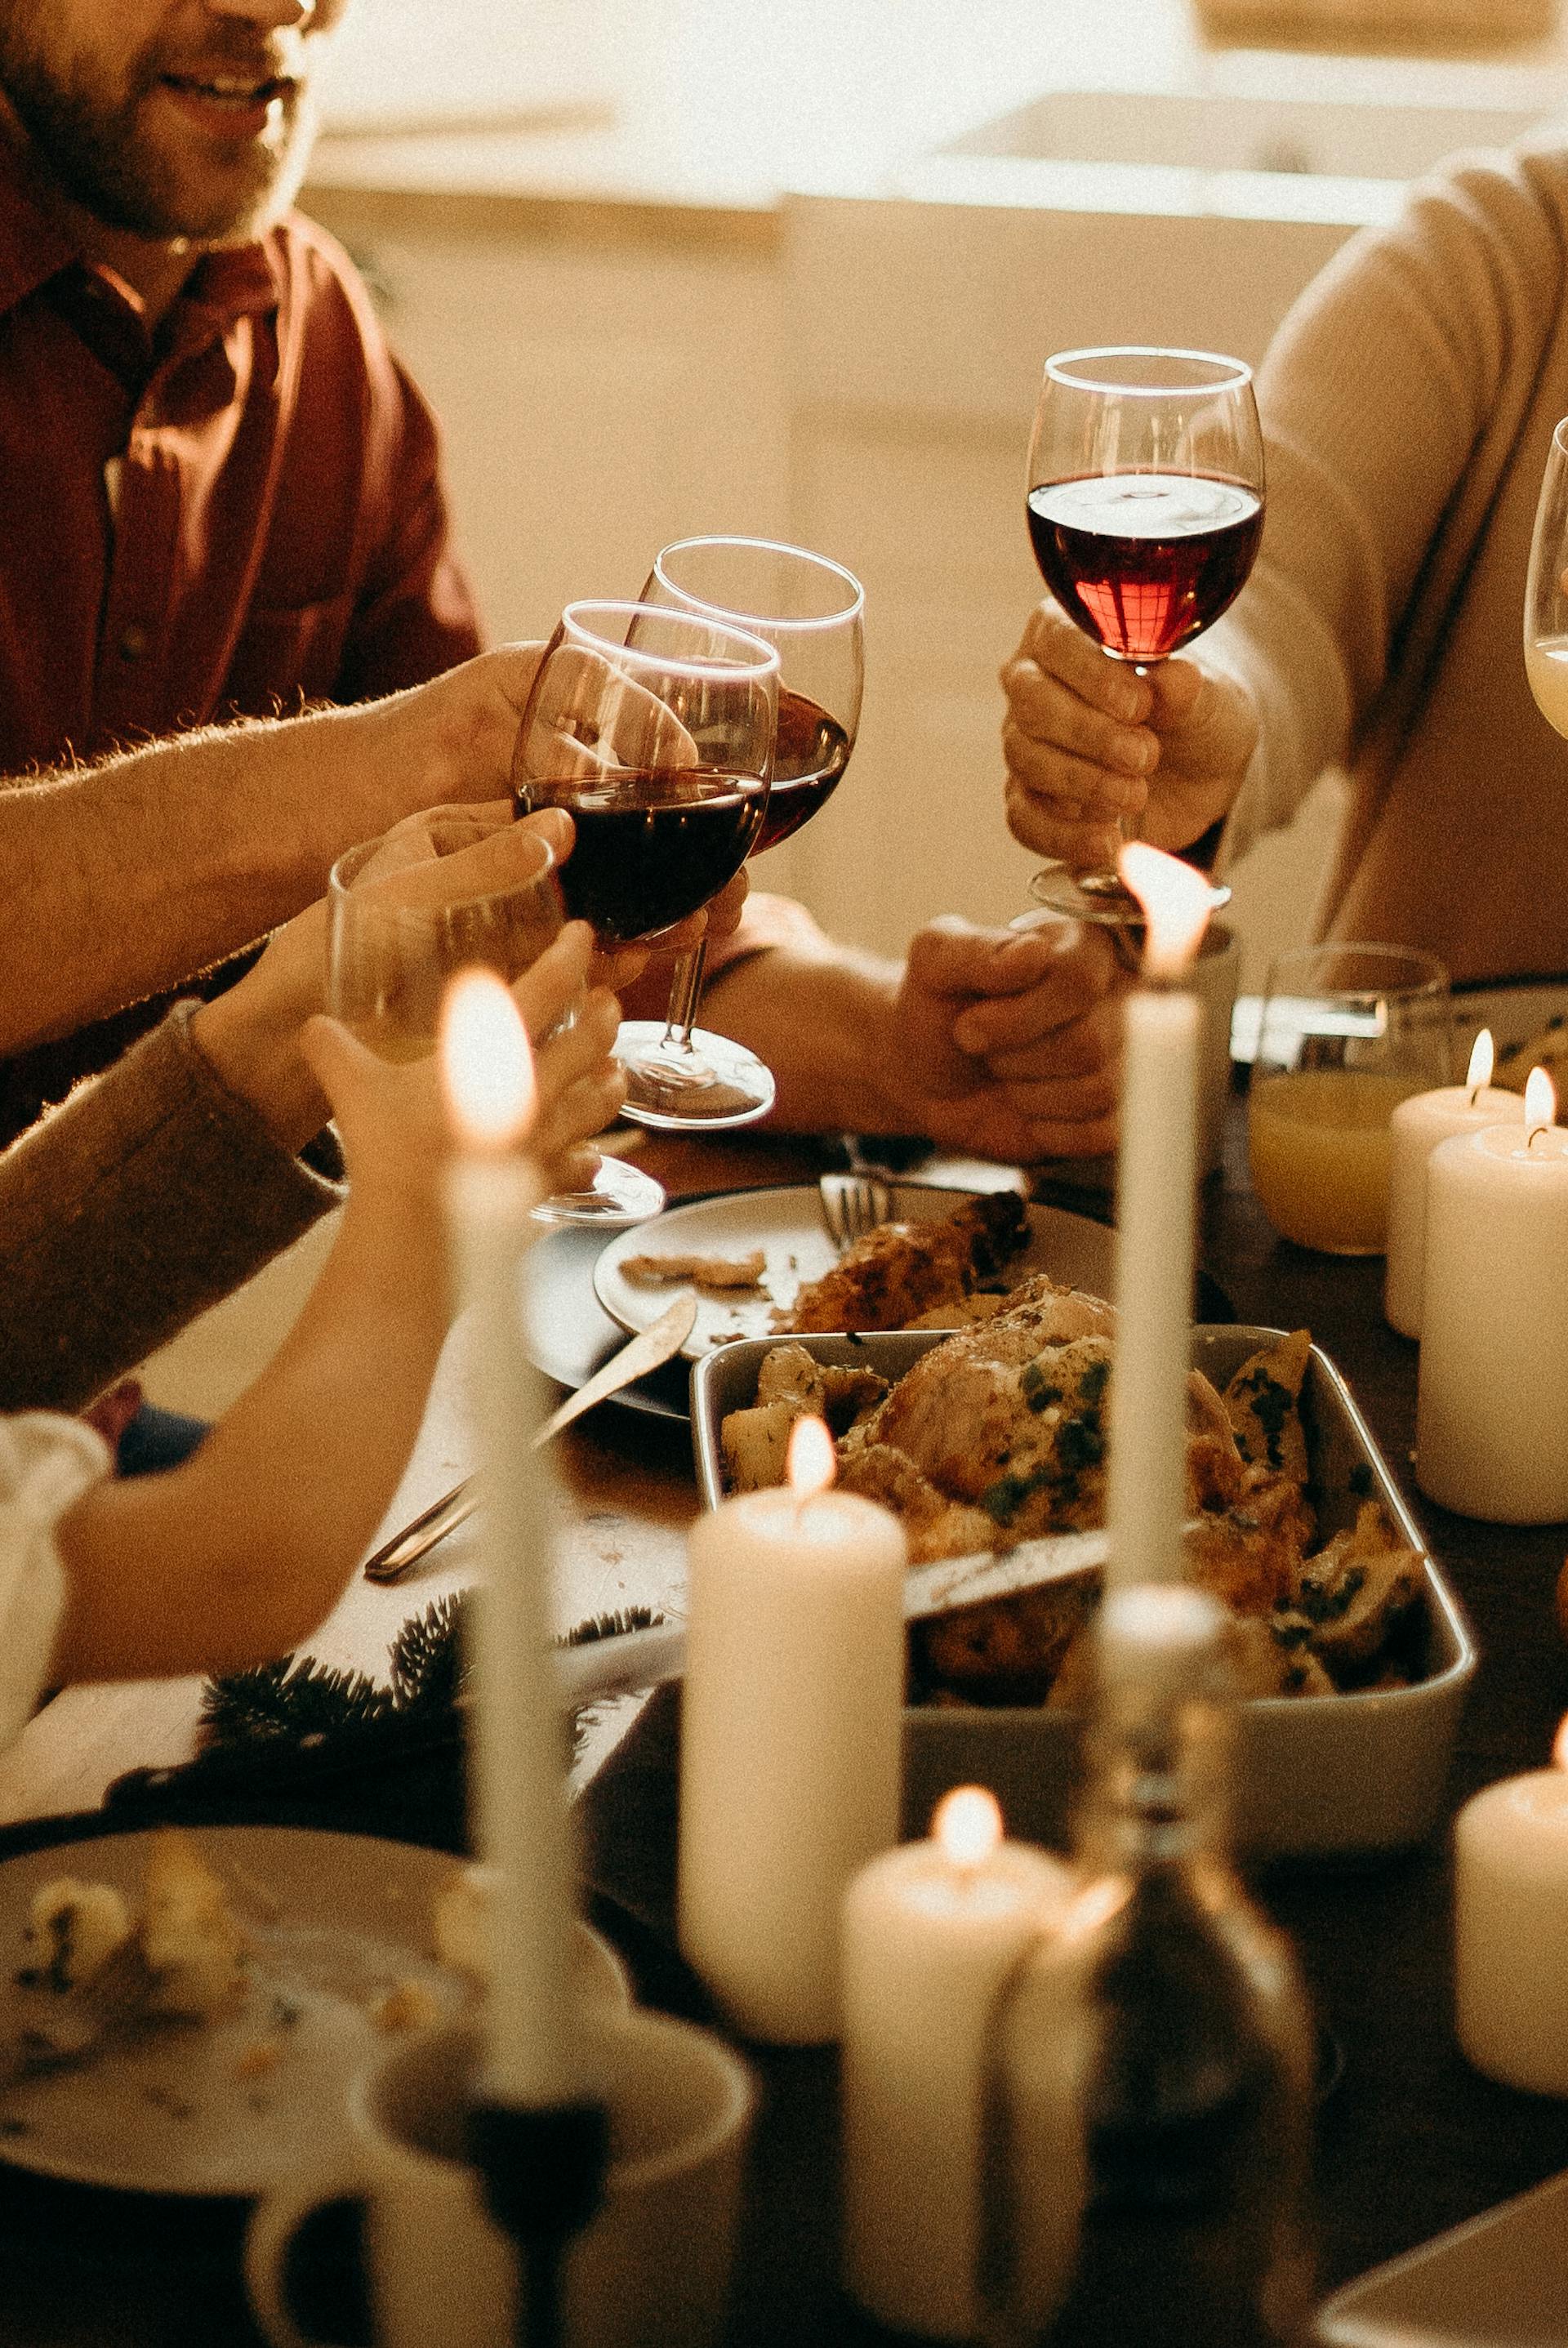 A happy family toasting during dinner | Source: Pexels